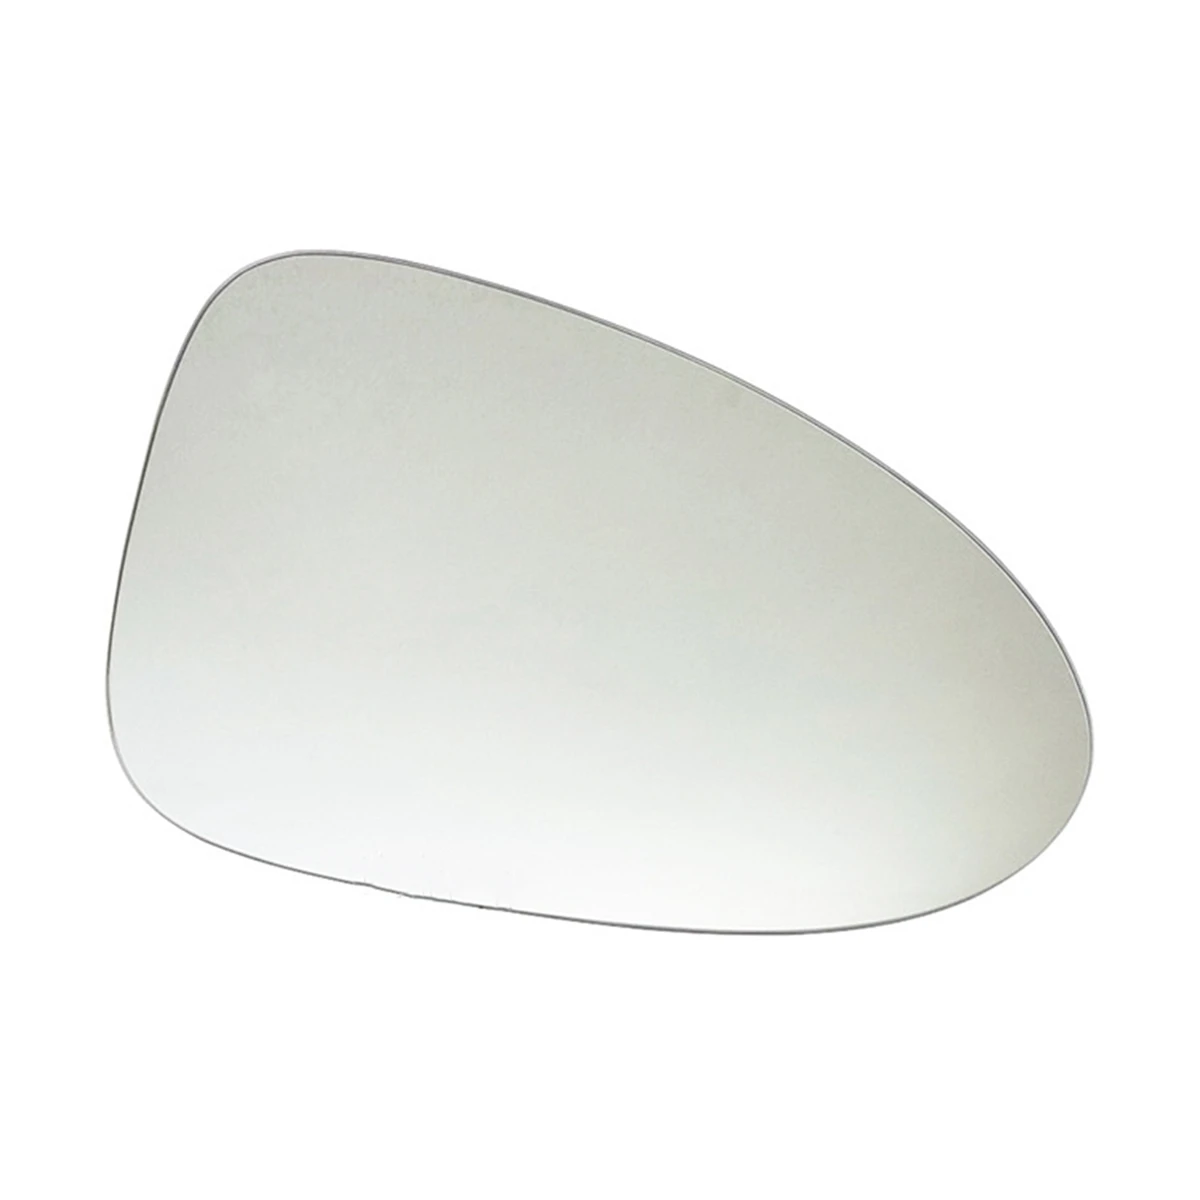 

Right Door Wing Side Mirror Glass Heated with Backing Plate for -Porsche Macan 2014-2020 95B857522A